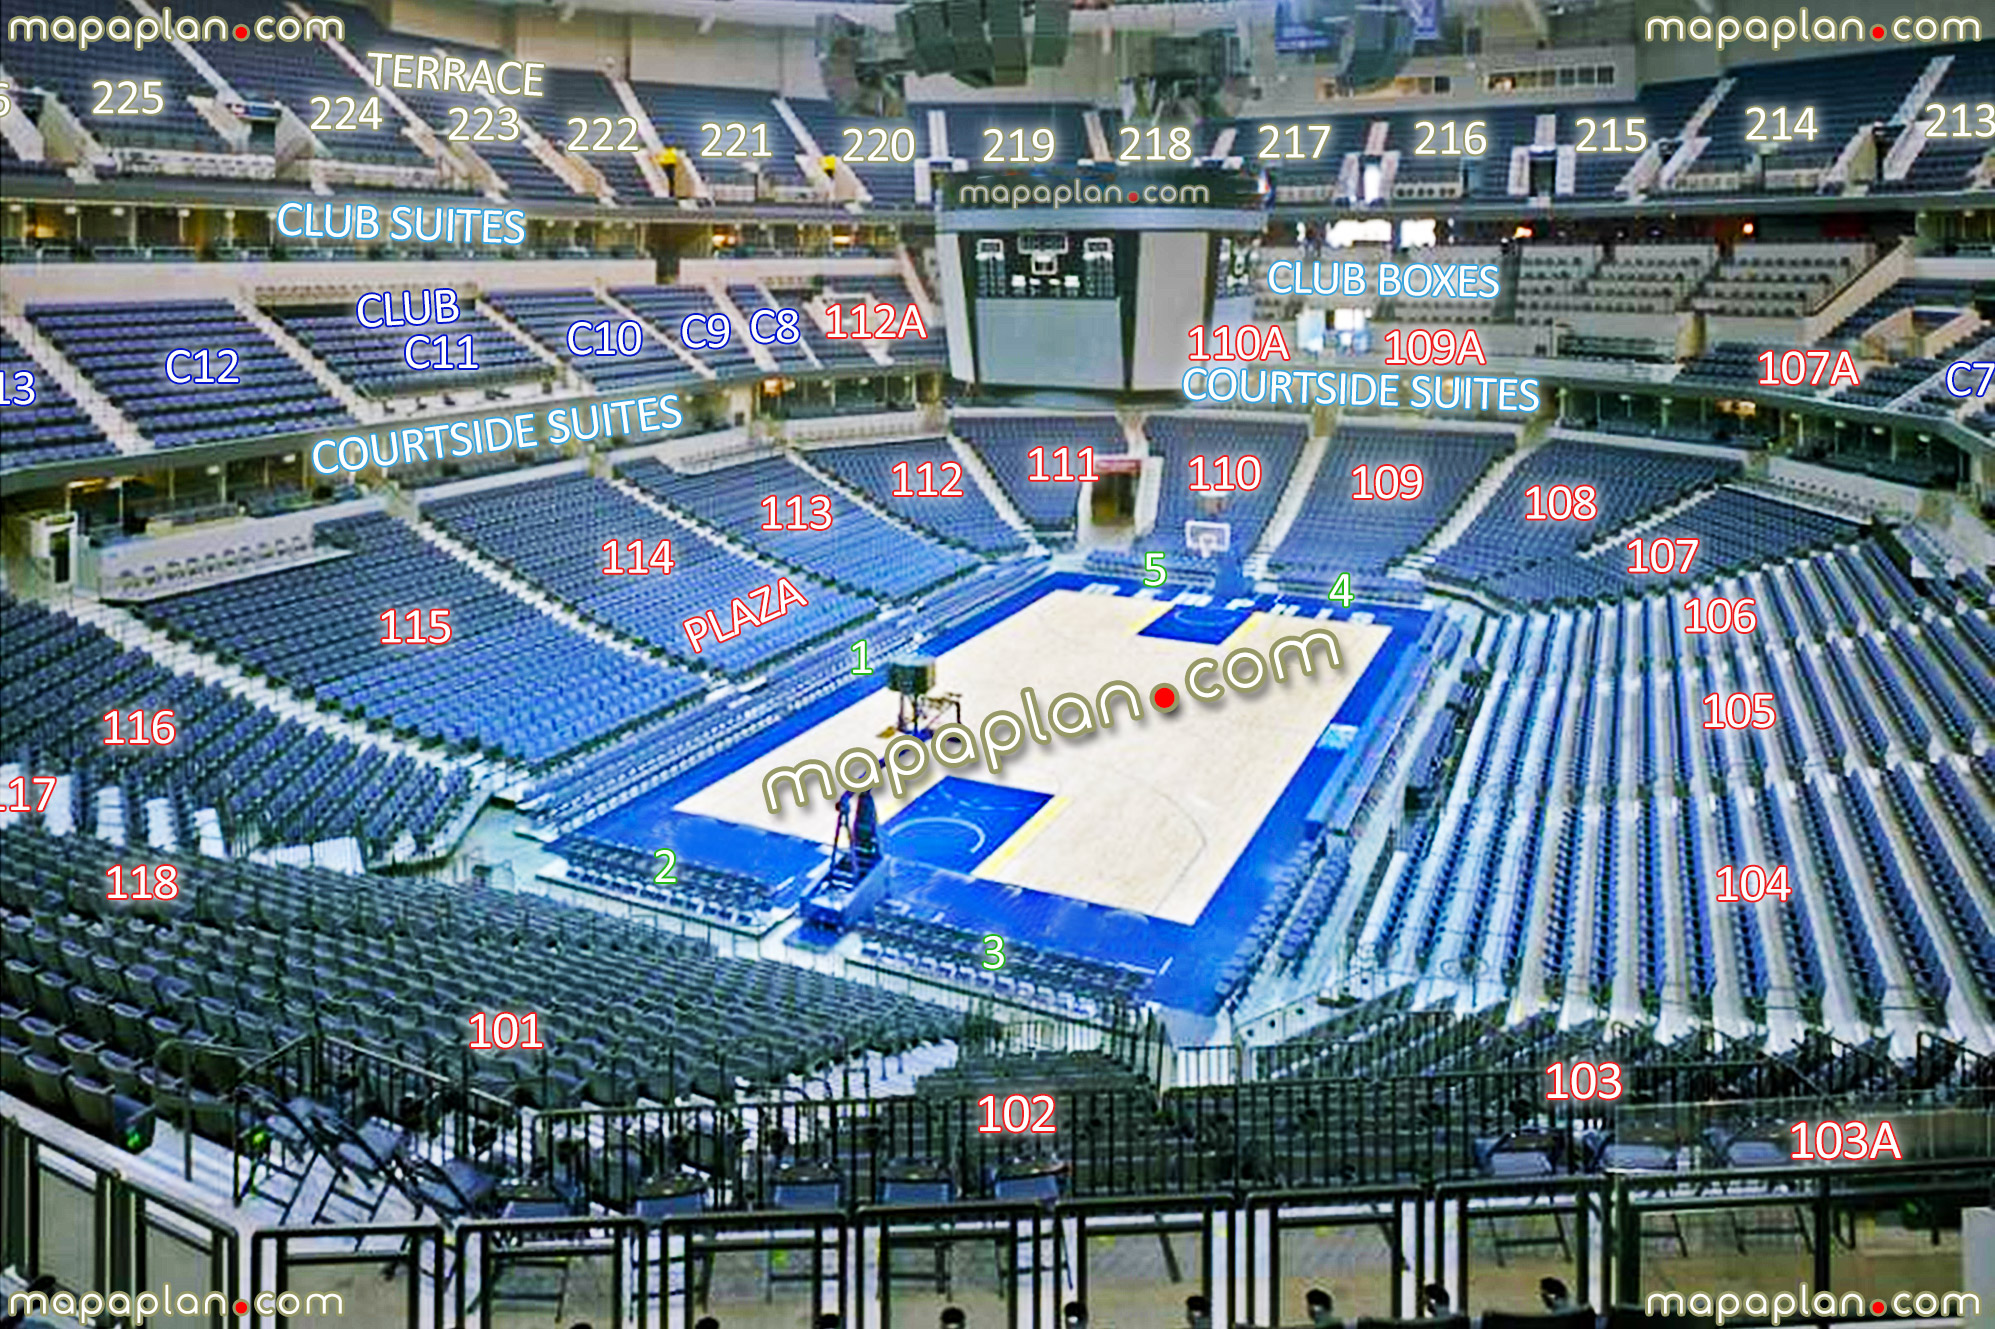 view section 102 row hh seat 6 grizzlies basketball games tournament virtual interactive seats arrangement viewer view photo review interior guide courtside sideline baseline club lower plaza upper terrace levels premium suites luxury loge boxes Memphis FedExForum seating chart